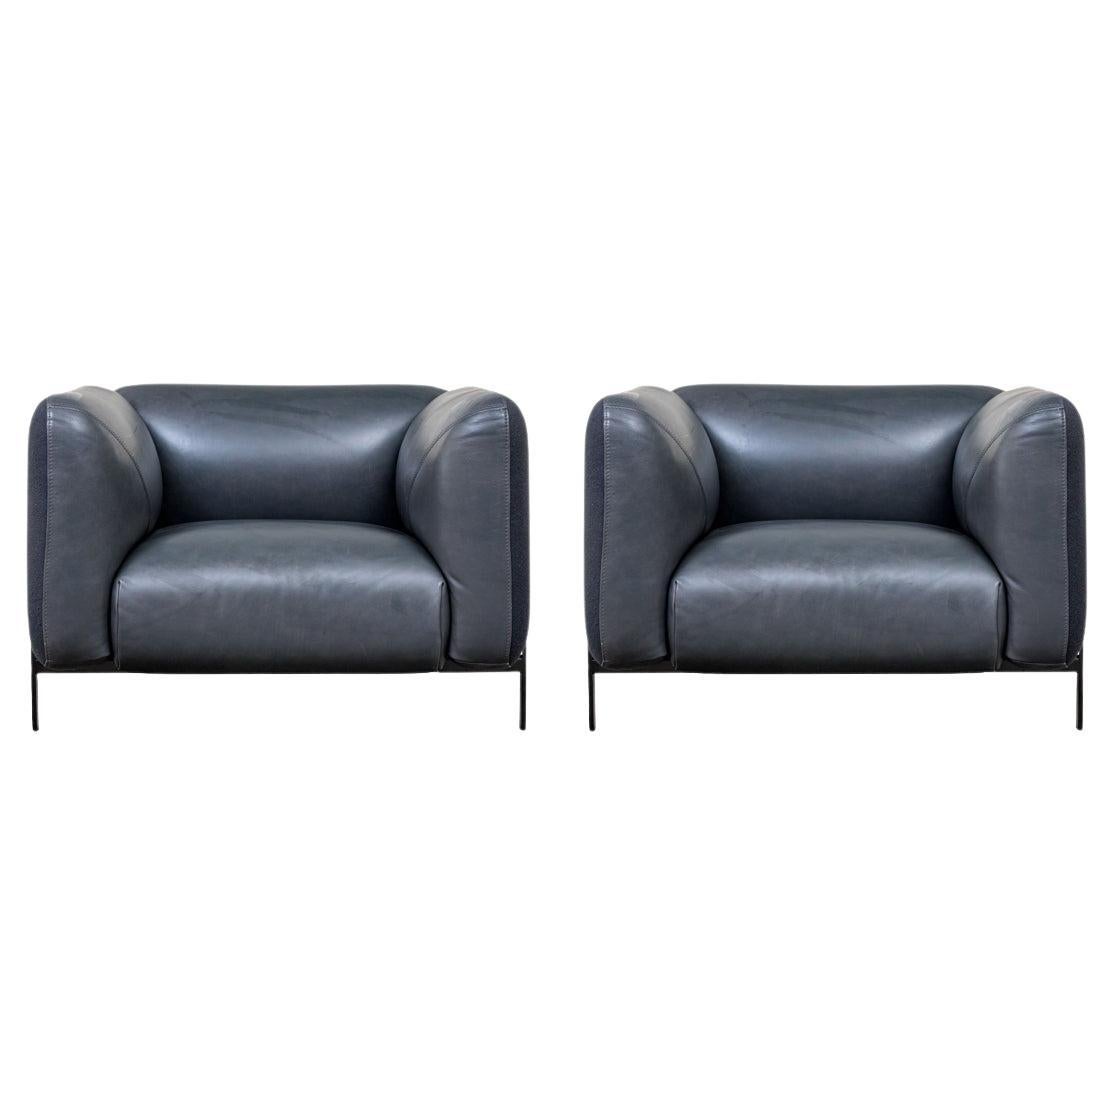 Pair Of Roche Bobois Leather Lobby Club Chairs By Cedric Ragot